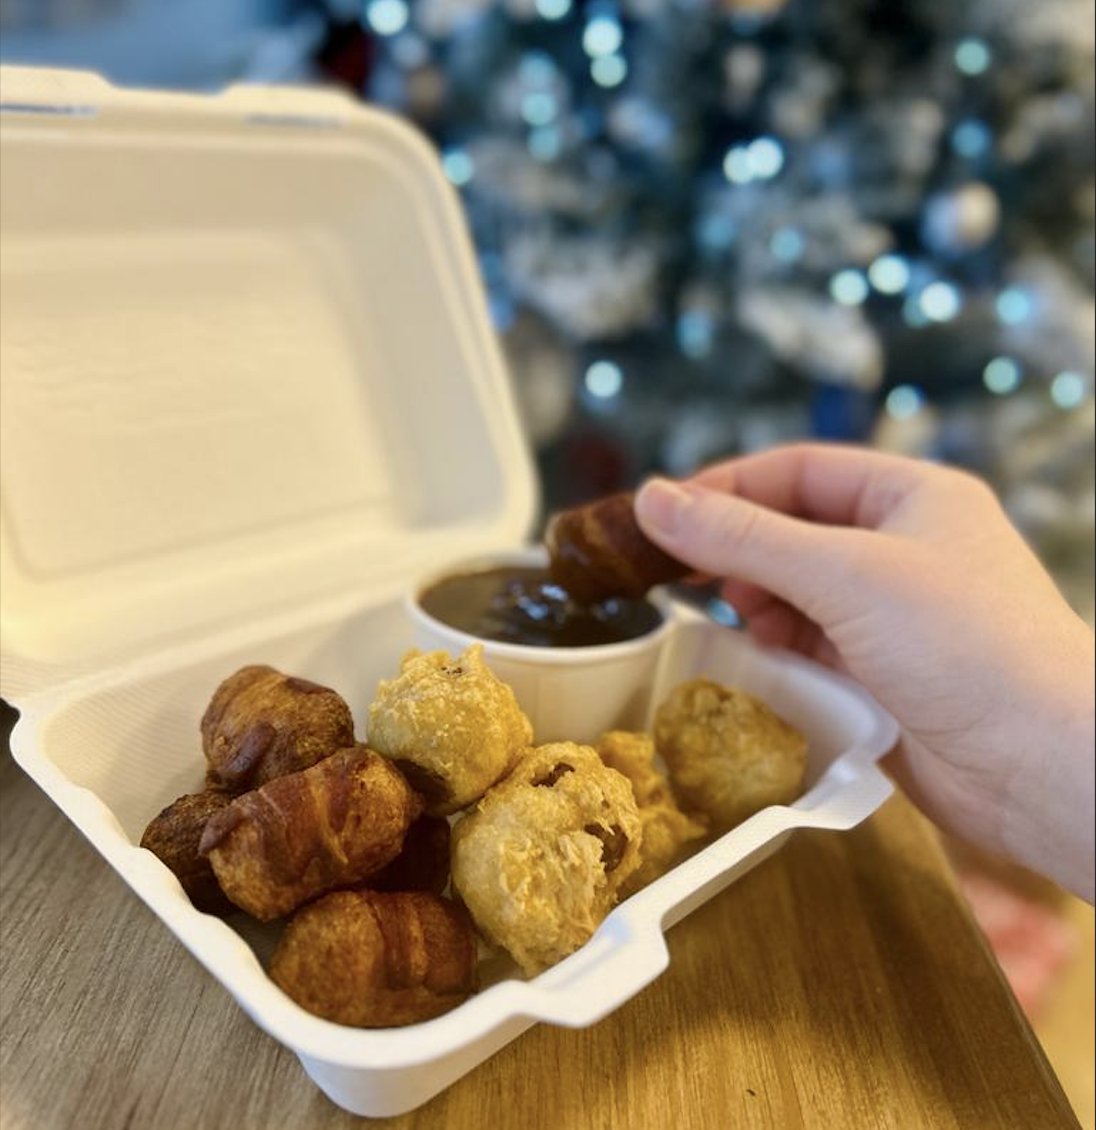 🎄New on the menu just in time for Christmas... Pigs In Blankets! 🤗🎄 6x pigs in blankets either battered or plain, you can even add a pot of gravy to dip them in 😋 Order now through our app or website... themasterfryer.com